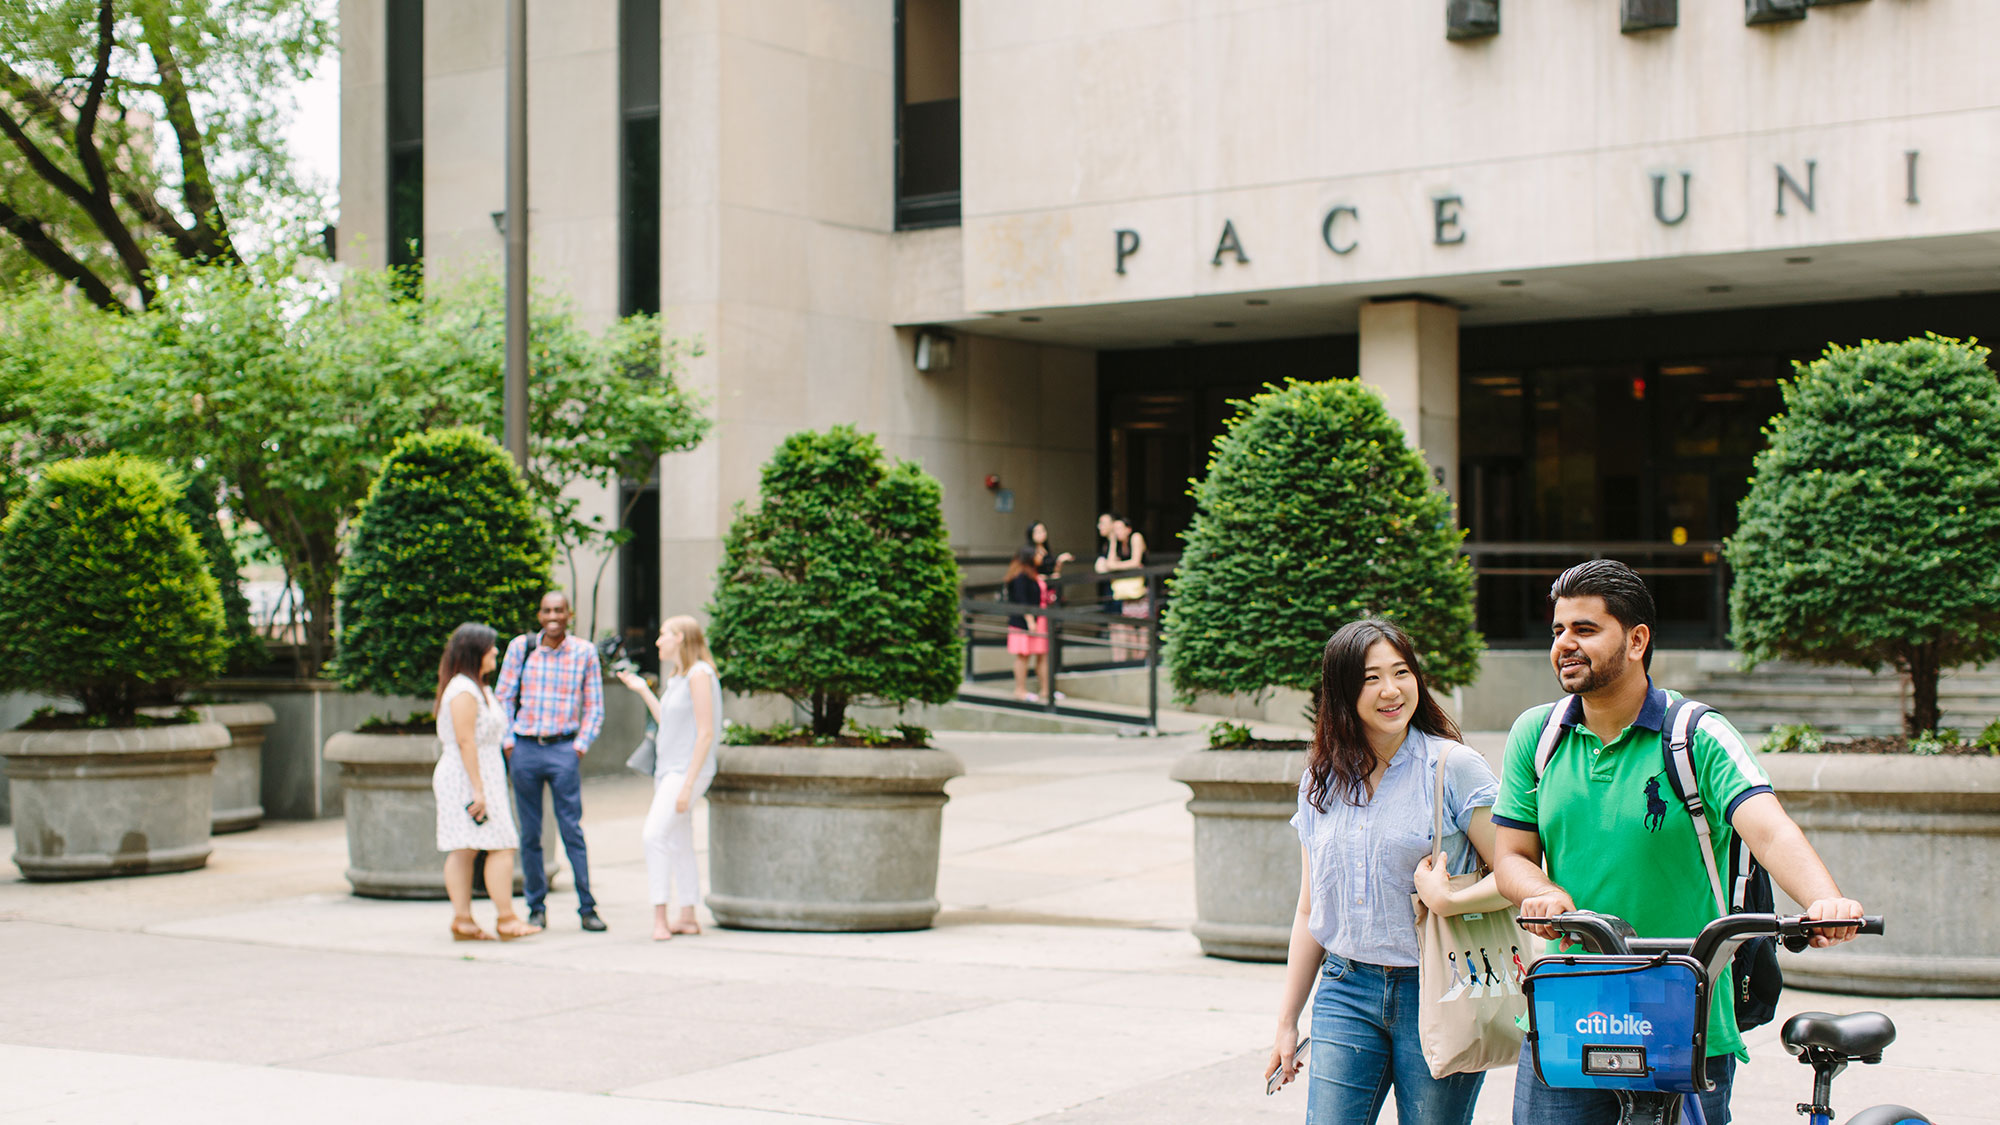 About Pace Administration Pace University New York